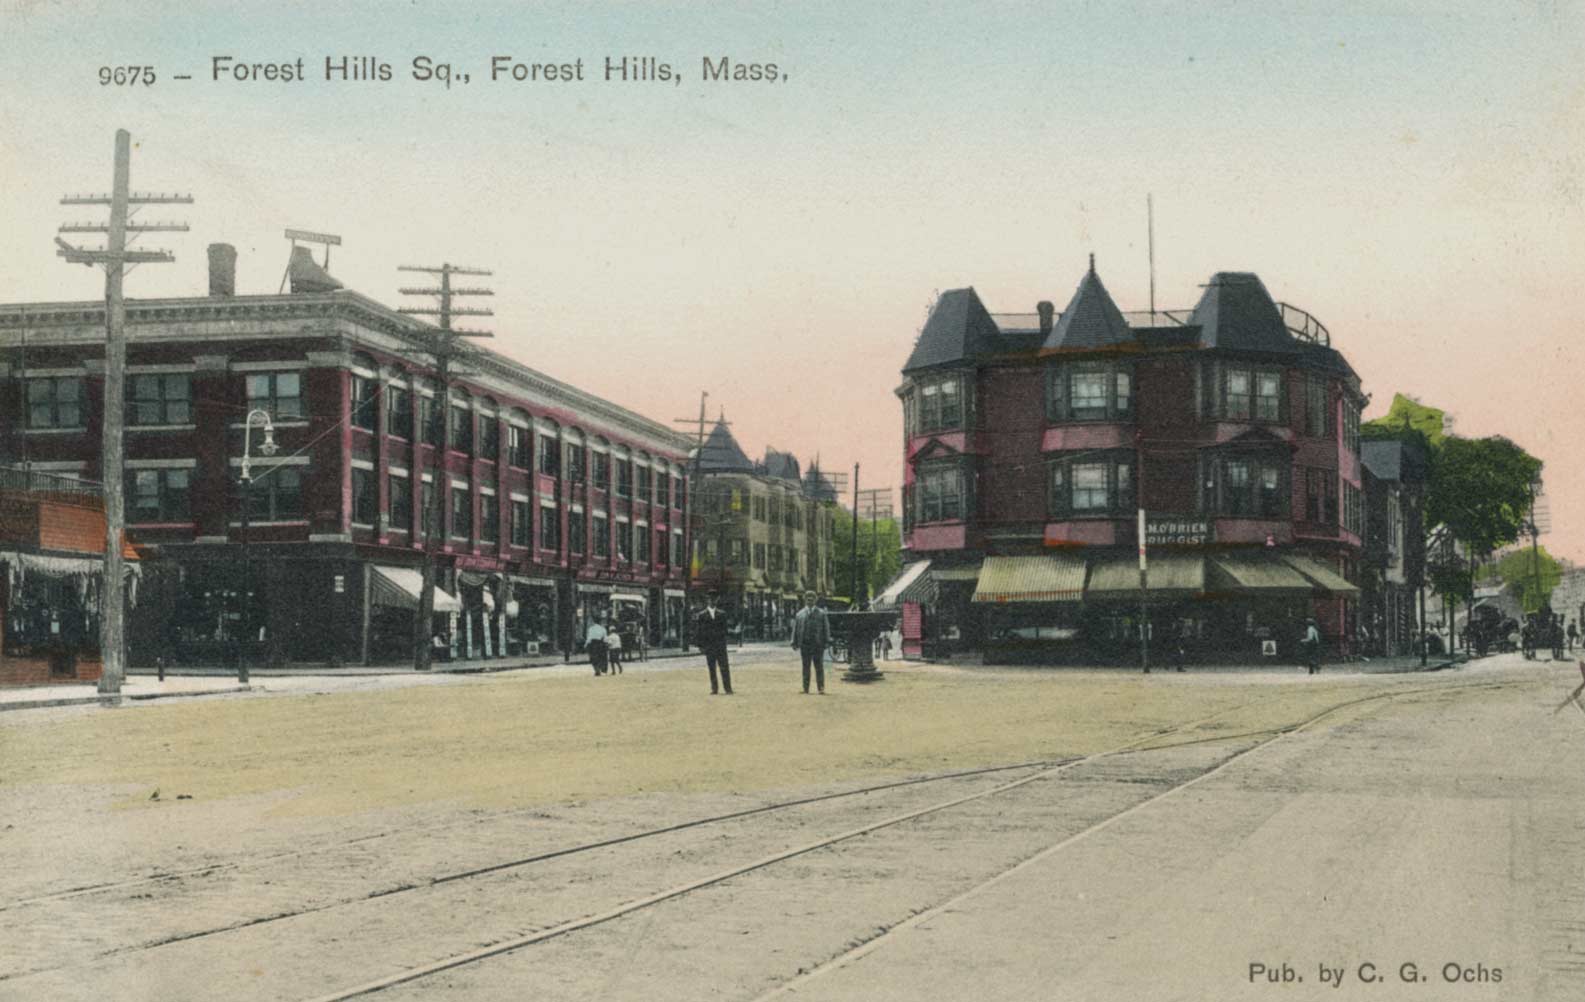   View of Forest Hills. Scanned from a postcard donated by Annie Finnegan, November 2007.  